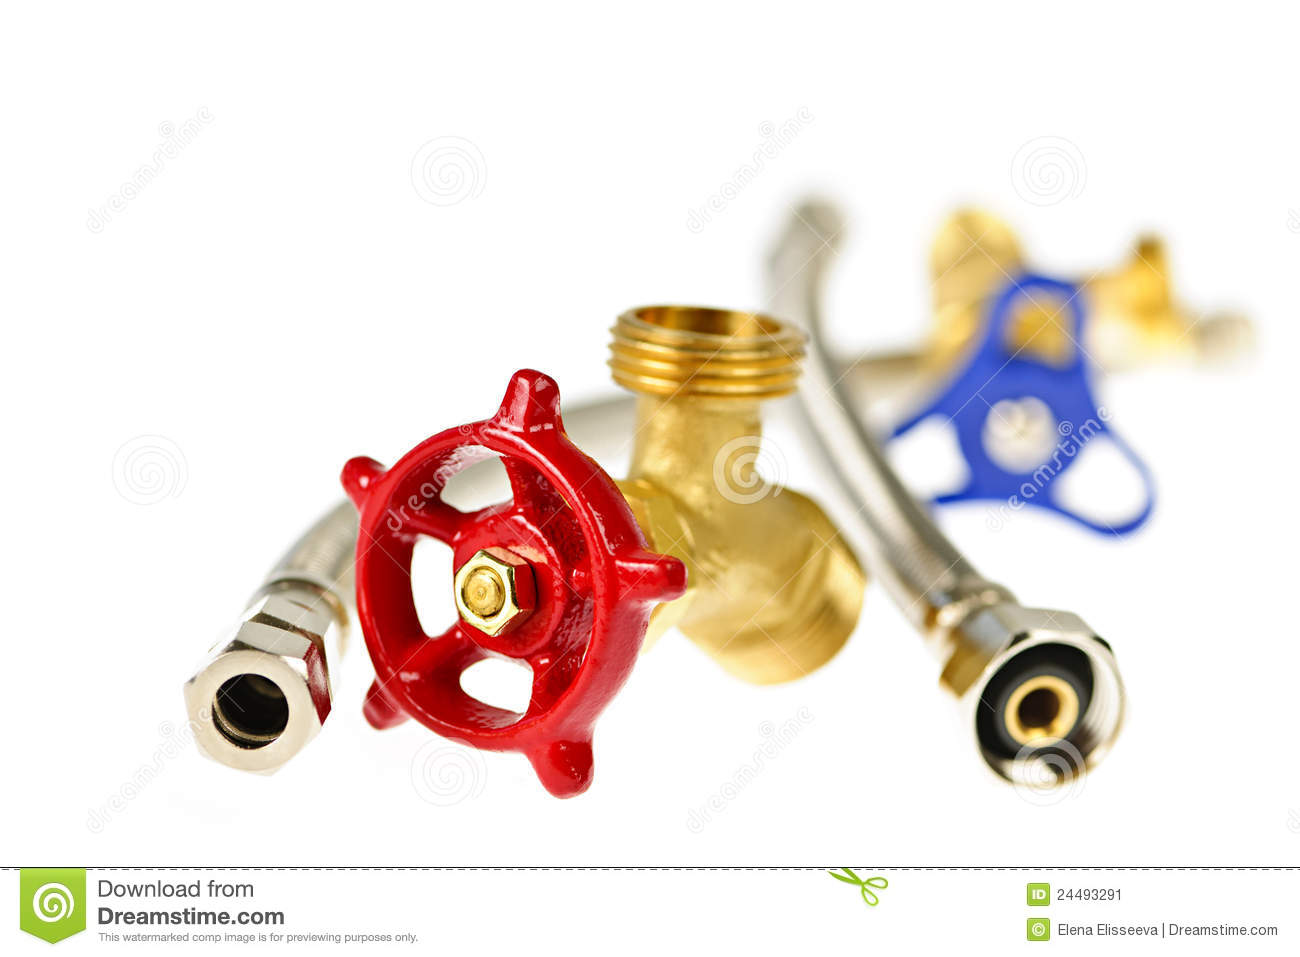 Isolated Plumbing Valves Hoses And Assorted Parts